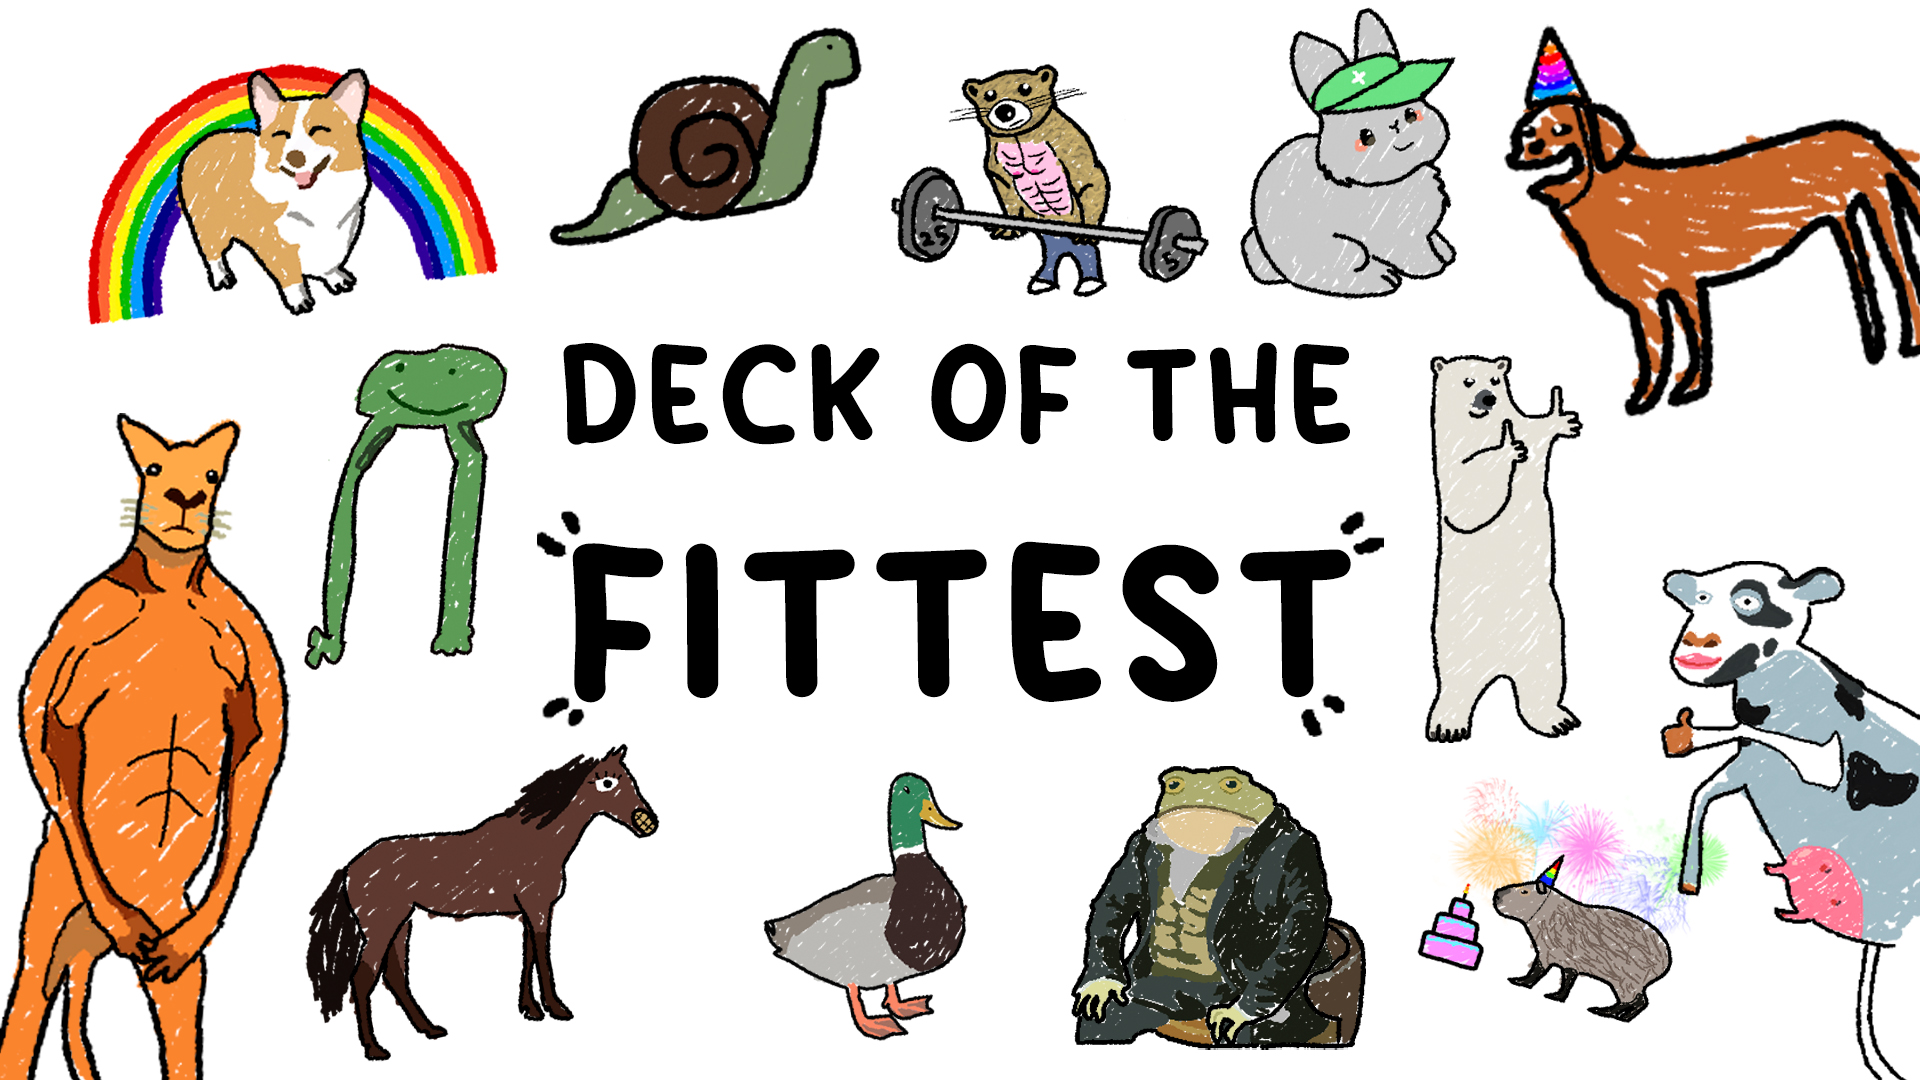 Deck of the Fittest